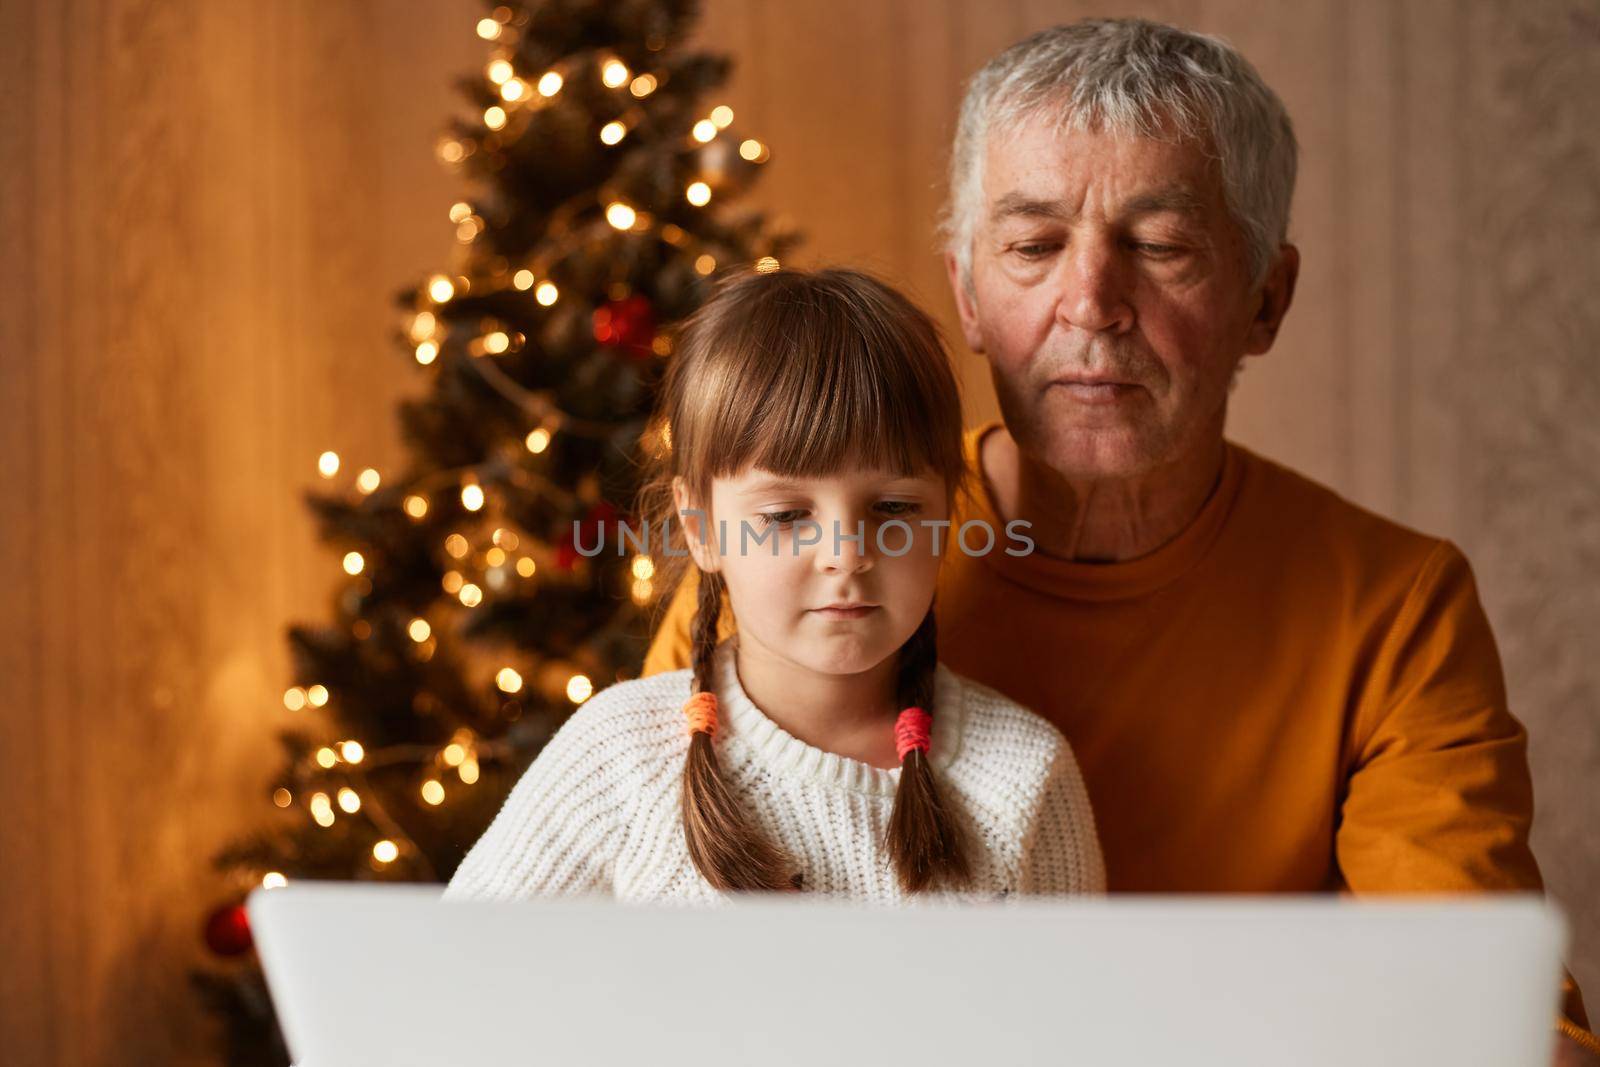 Indoor shot of mature man wearing orange sweater and little girl sitting in front of laptop with Christmas tree on background, looking at monitor with serious concentrated expression.